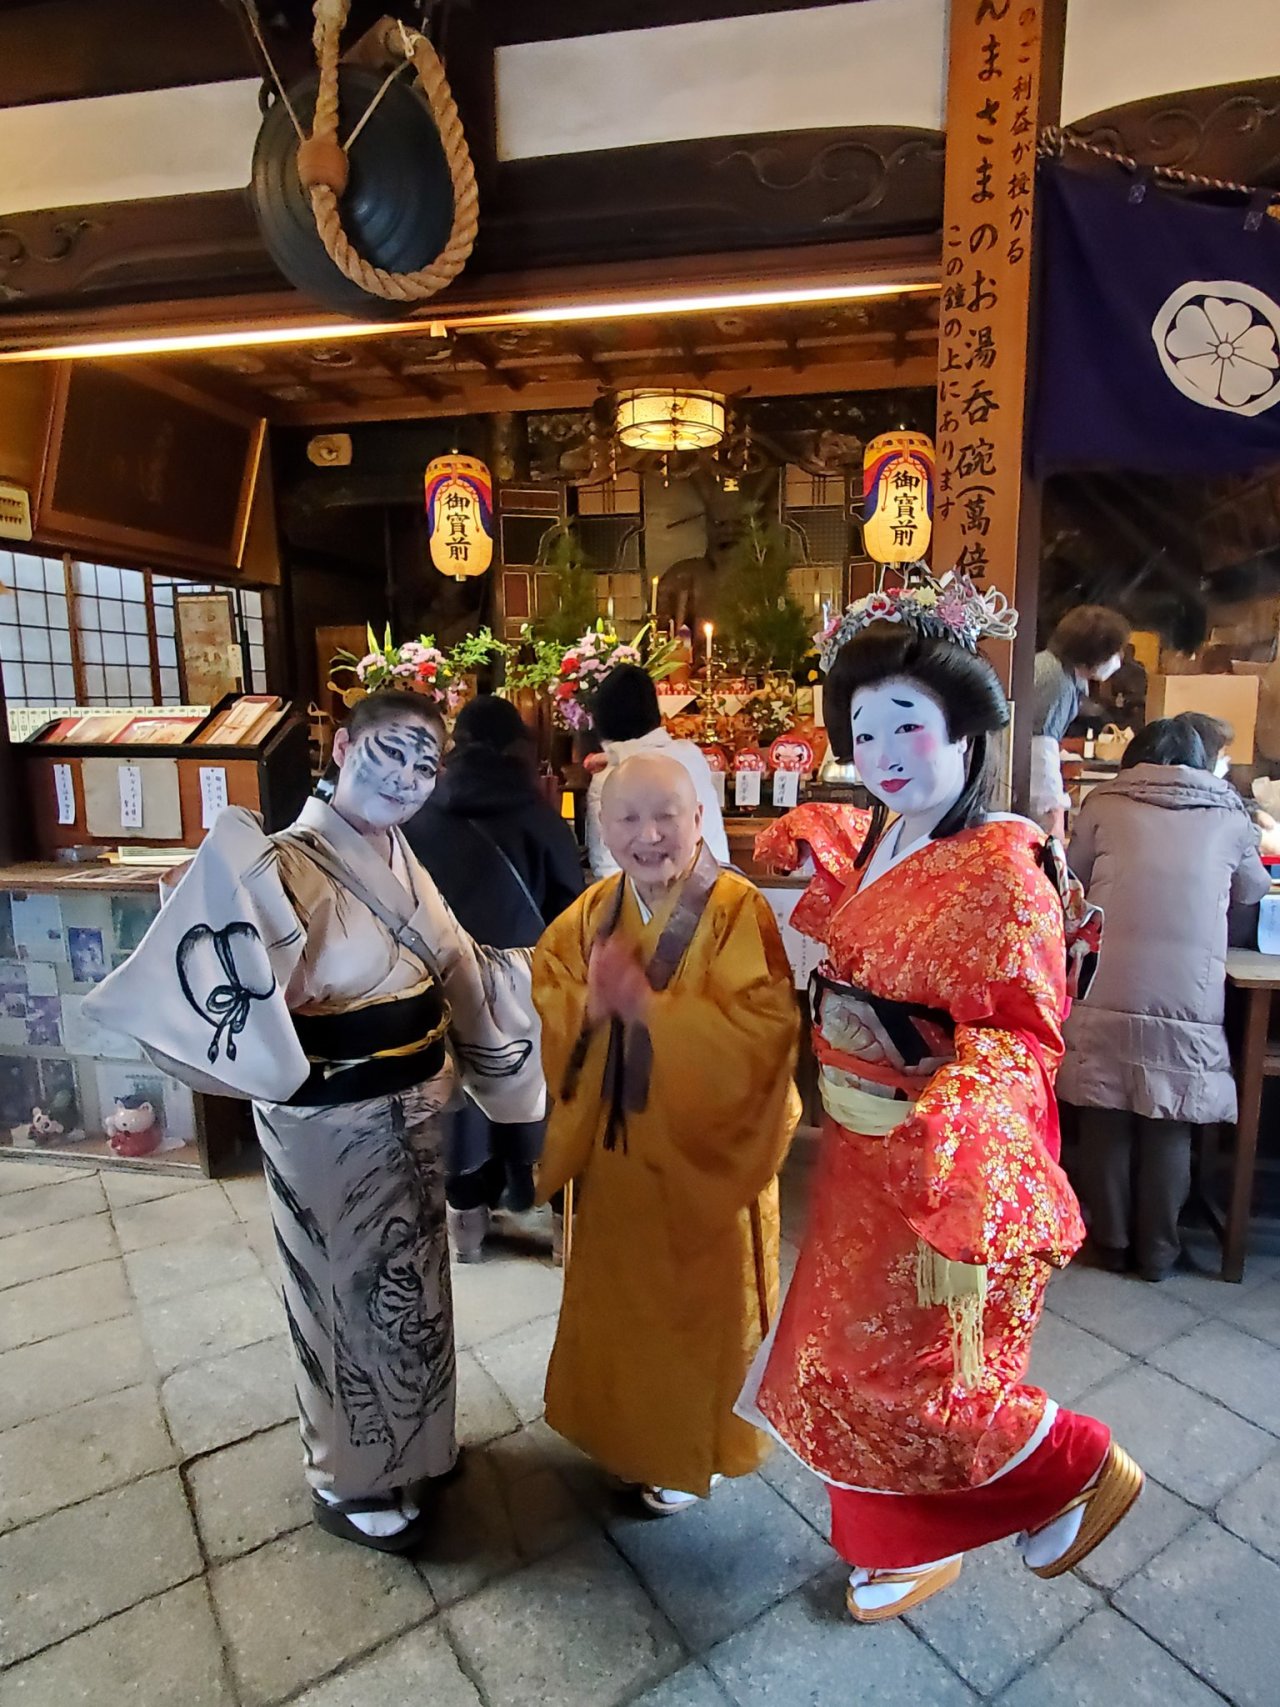 February 2022: Aoi-tayuu and Tsukasa-tayuu, of Suehiro okiya, posing in costumes for Obake with a bikuni (i.e. Buddhist nun) at the Senbon Enmado at Injo-ji Temple in Kamigyo, Kyoto, Japan. Obake is a part of Setsubun celebrations where the wearing of outrageous costumes is meant to confuse ghosts who would bring bad luck. On the right, Aoi-tayuu is wearing a costume resembling the character Tsuri Onna from the kabuki play “ Ebisu Môde Koi no Tsuribari,” who is considered to be an ugly woman. On the left, Tsukasa-tayuu is wearing a tiger inspired costume because 2022 is the year of the Tiger.Source: https://twitter.com/ayaka8700119/status/1489158894362382337?s=20&t=zpFzDBd33hAYR6lJ4QAFYA #kimono#tayu#tayuu#aoi#aoitayu#aoitayuu#tsukasa#tsukasatayu#tsukasatayuu#suehiro#suehirookiya#suehiroageya#suehirotayu#suehirotayuu#suehirotimeline#suehiro2022#shimabara#shimabaratayu#shimabaratayuu